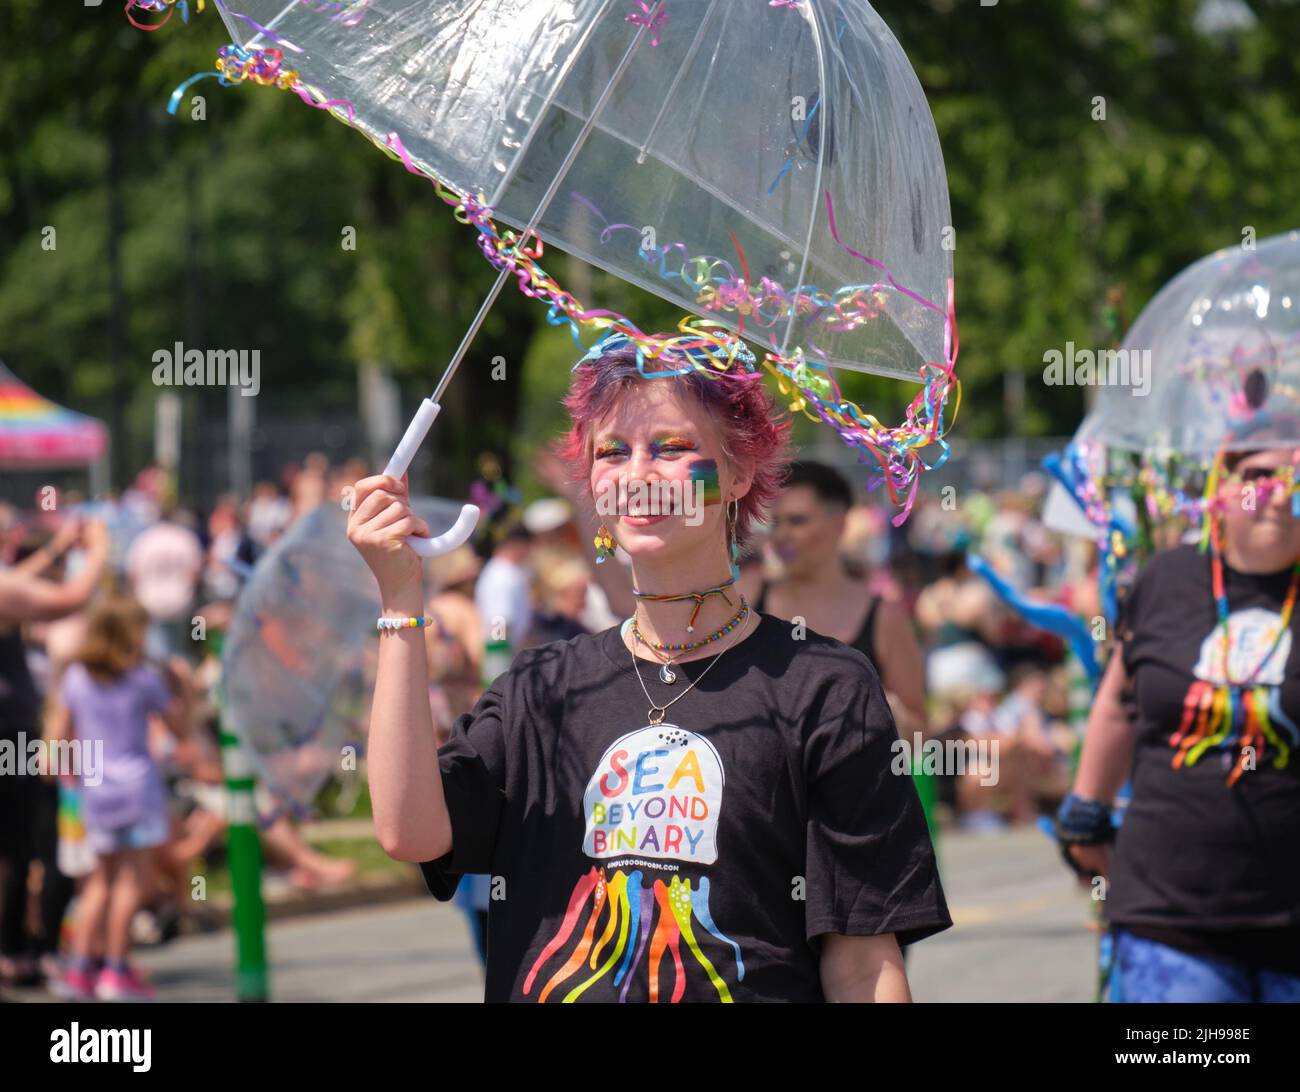 Halifax, Canada. July 16th, 2022. Participant in the 2022 Halifax Pride Parade. The Parade returns through the street of the city after two years absence. Credit: meanderingemu/Alamy Live News Stock Photo